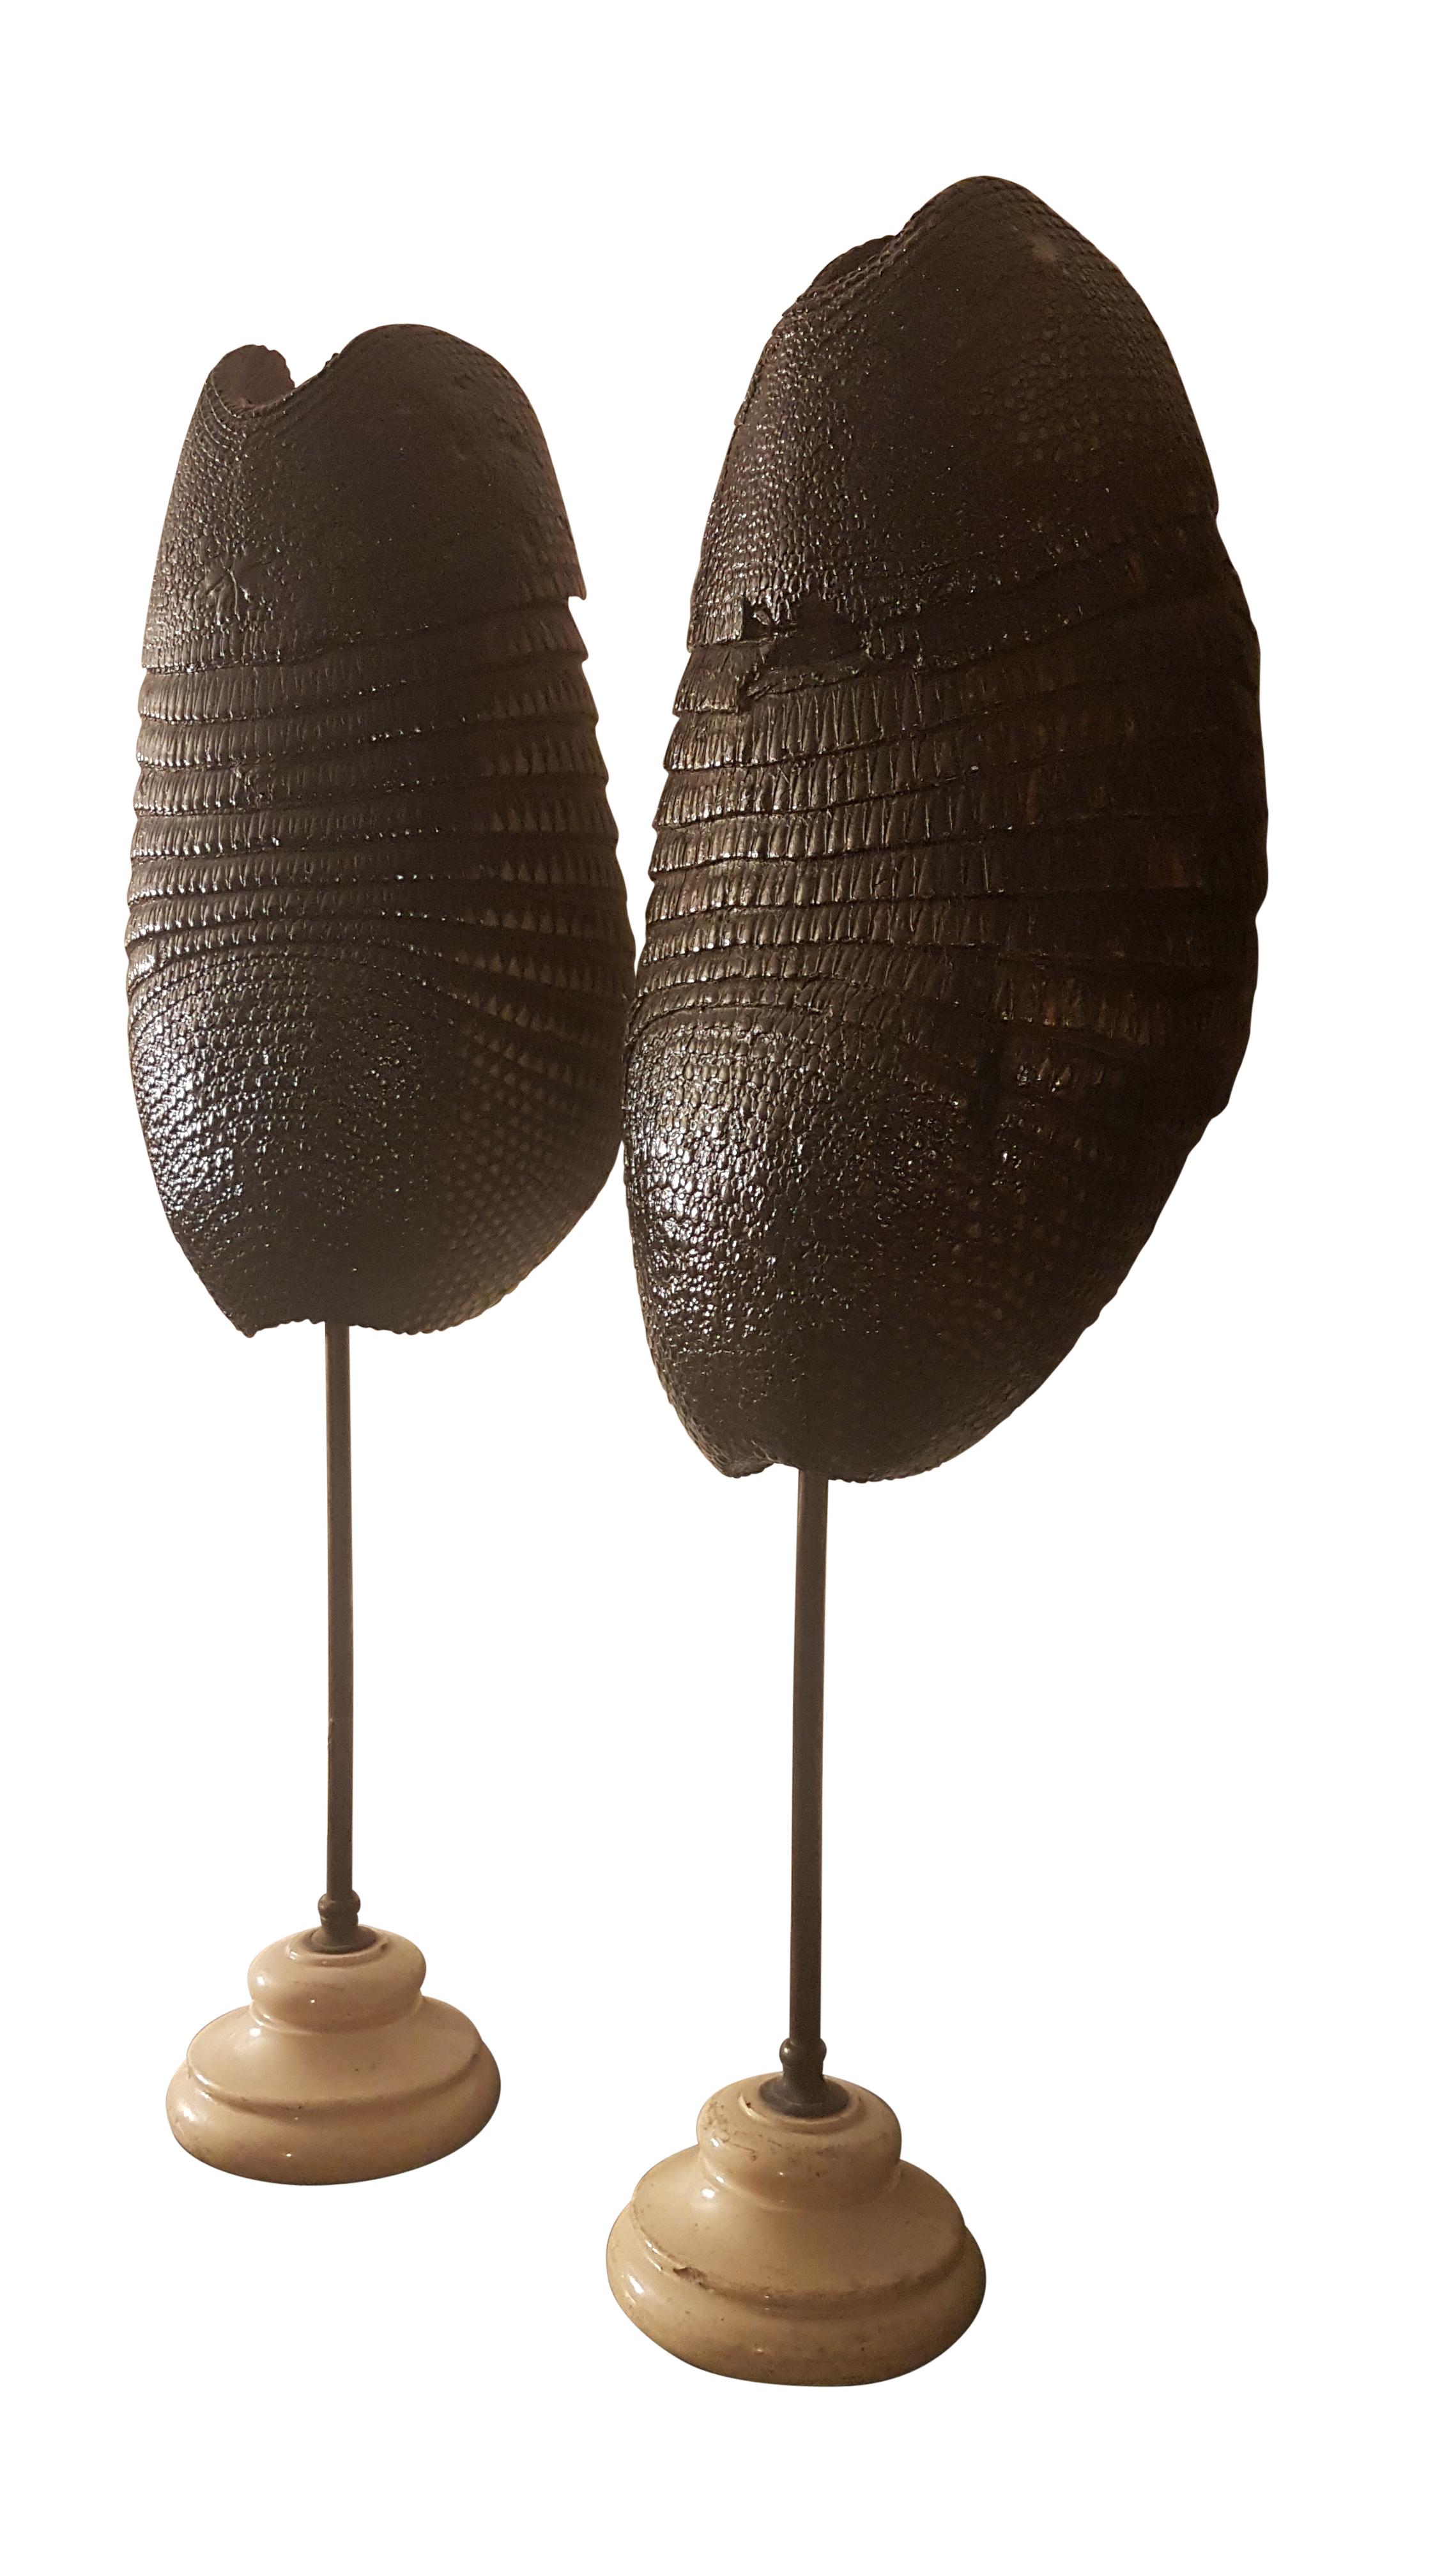 Very nice and decorative pair of late 19th century 9 banded armadillo shells on earlier 19th century porcelain and brass stands. The shells are held in place with a spiked split bar at the back, the shells are in good order although one has had old